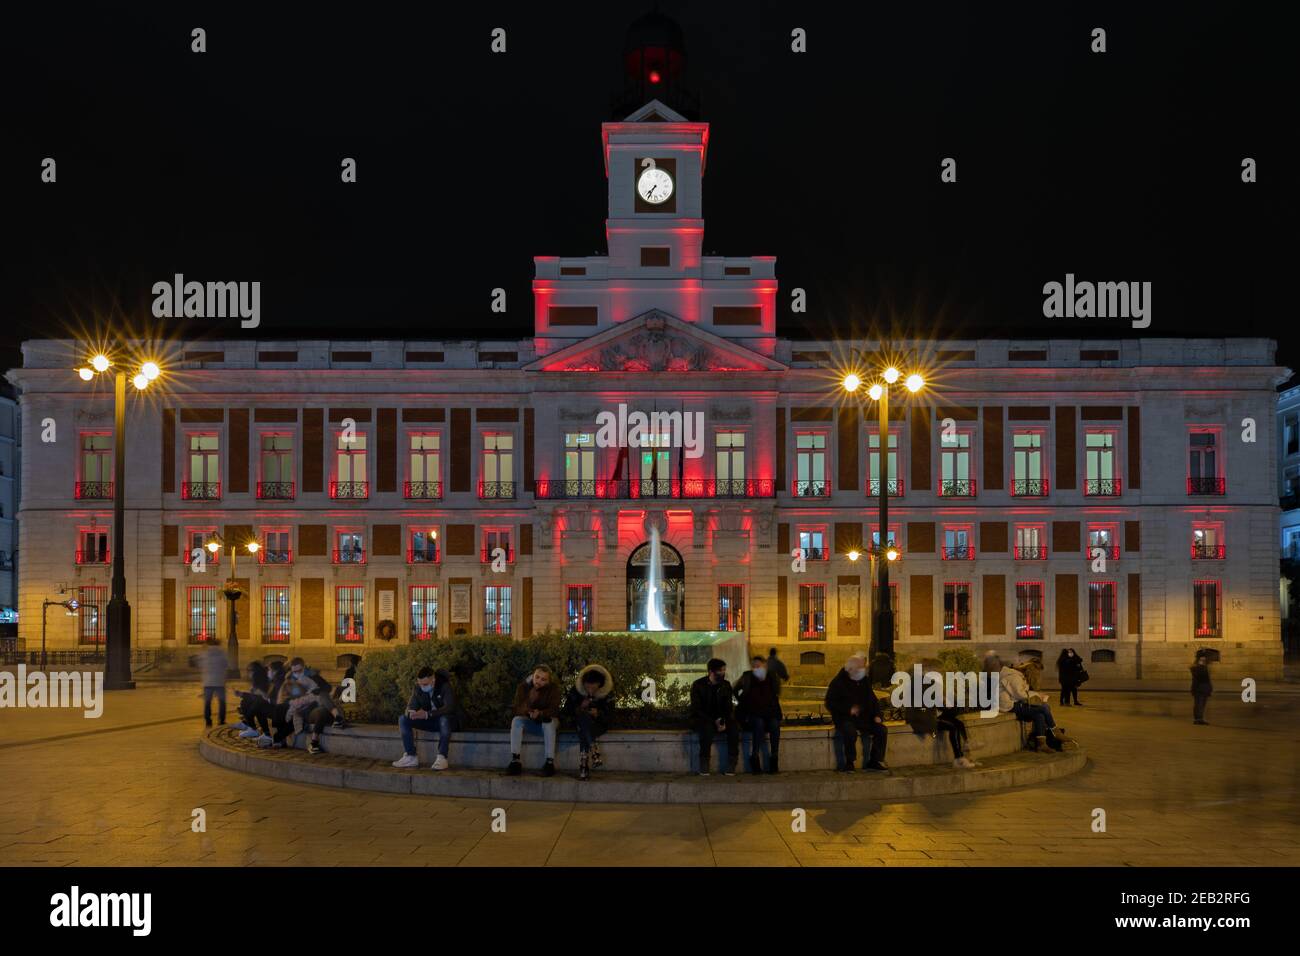 Madrid, Spain. 11th Feb, 2021. The Royal Post Office building is illuminated with red light to celebrate the Chinese Lunar New Year at Puerta del Sol in Madrid, Spain, Feb. 11, 2021. Credit: Meng Dingbo/Xinhua/Alamy Live News Stock Photo